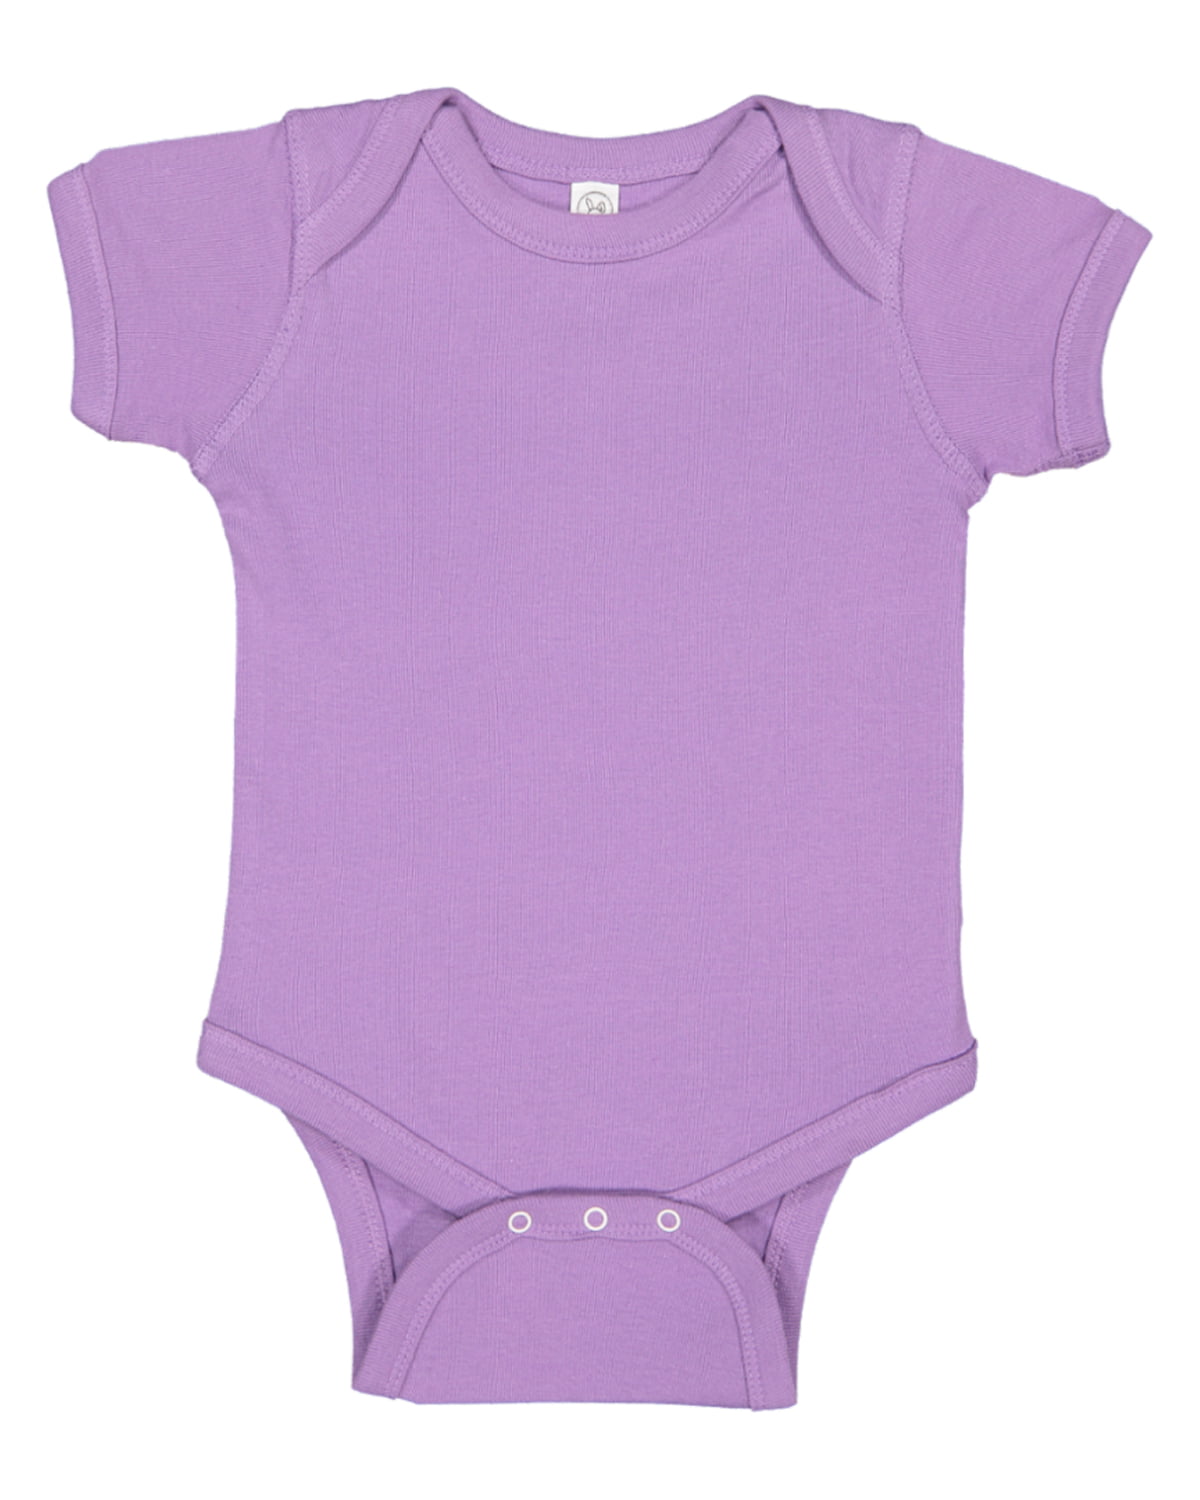 A Product of Rabbit Skins Infant Baby Rib Bodysuit - LAVENDER - 24MOS ...